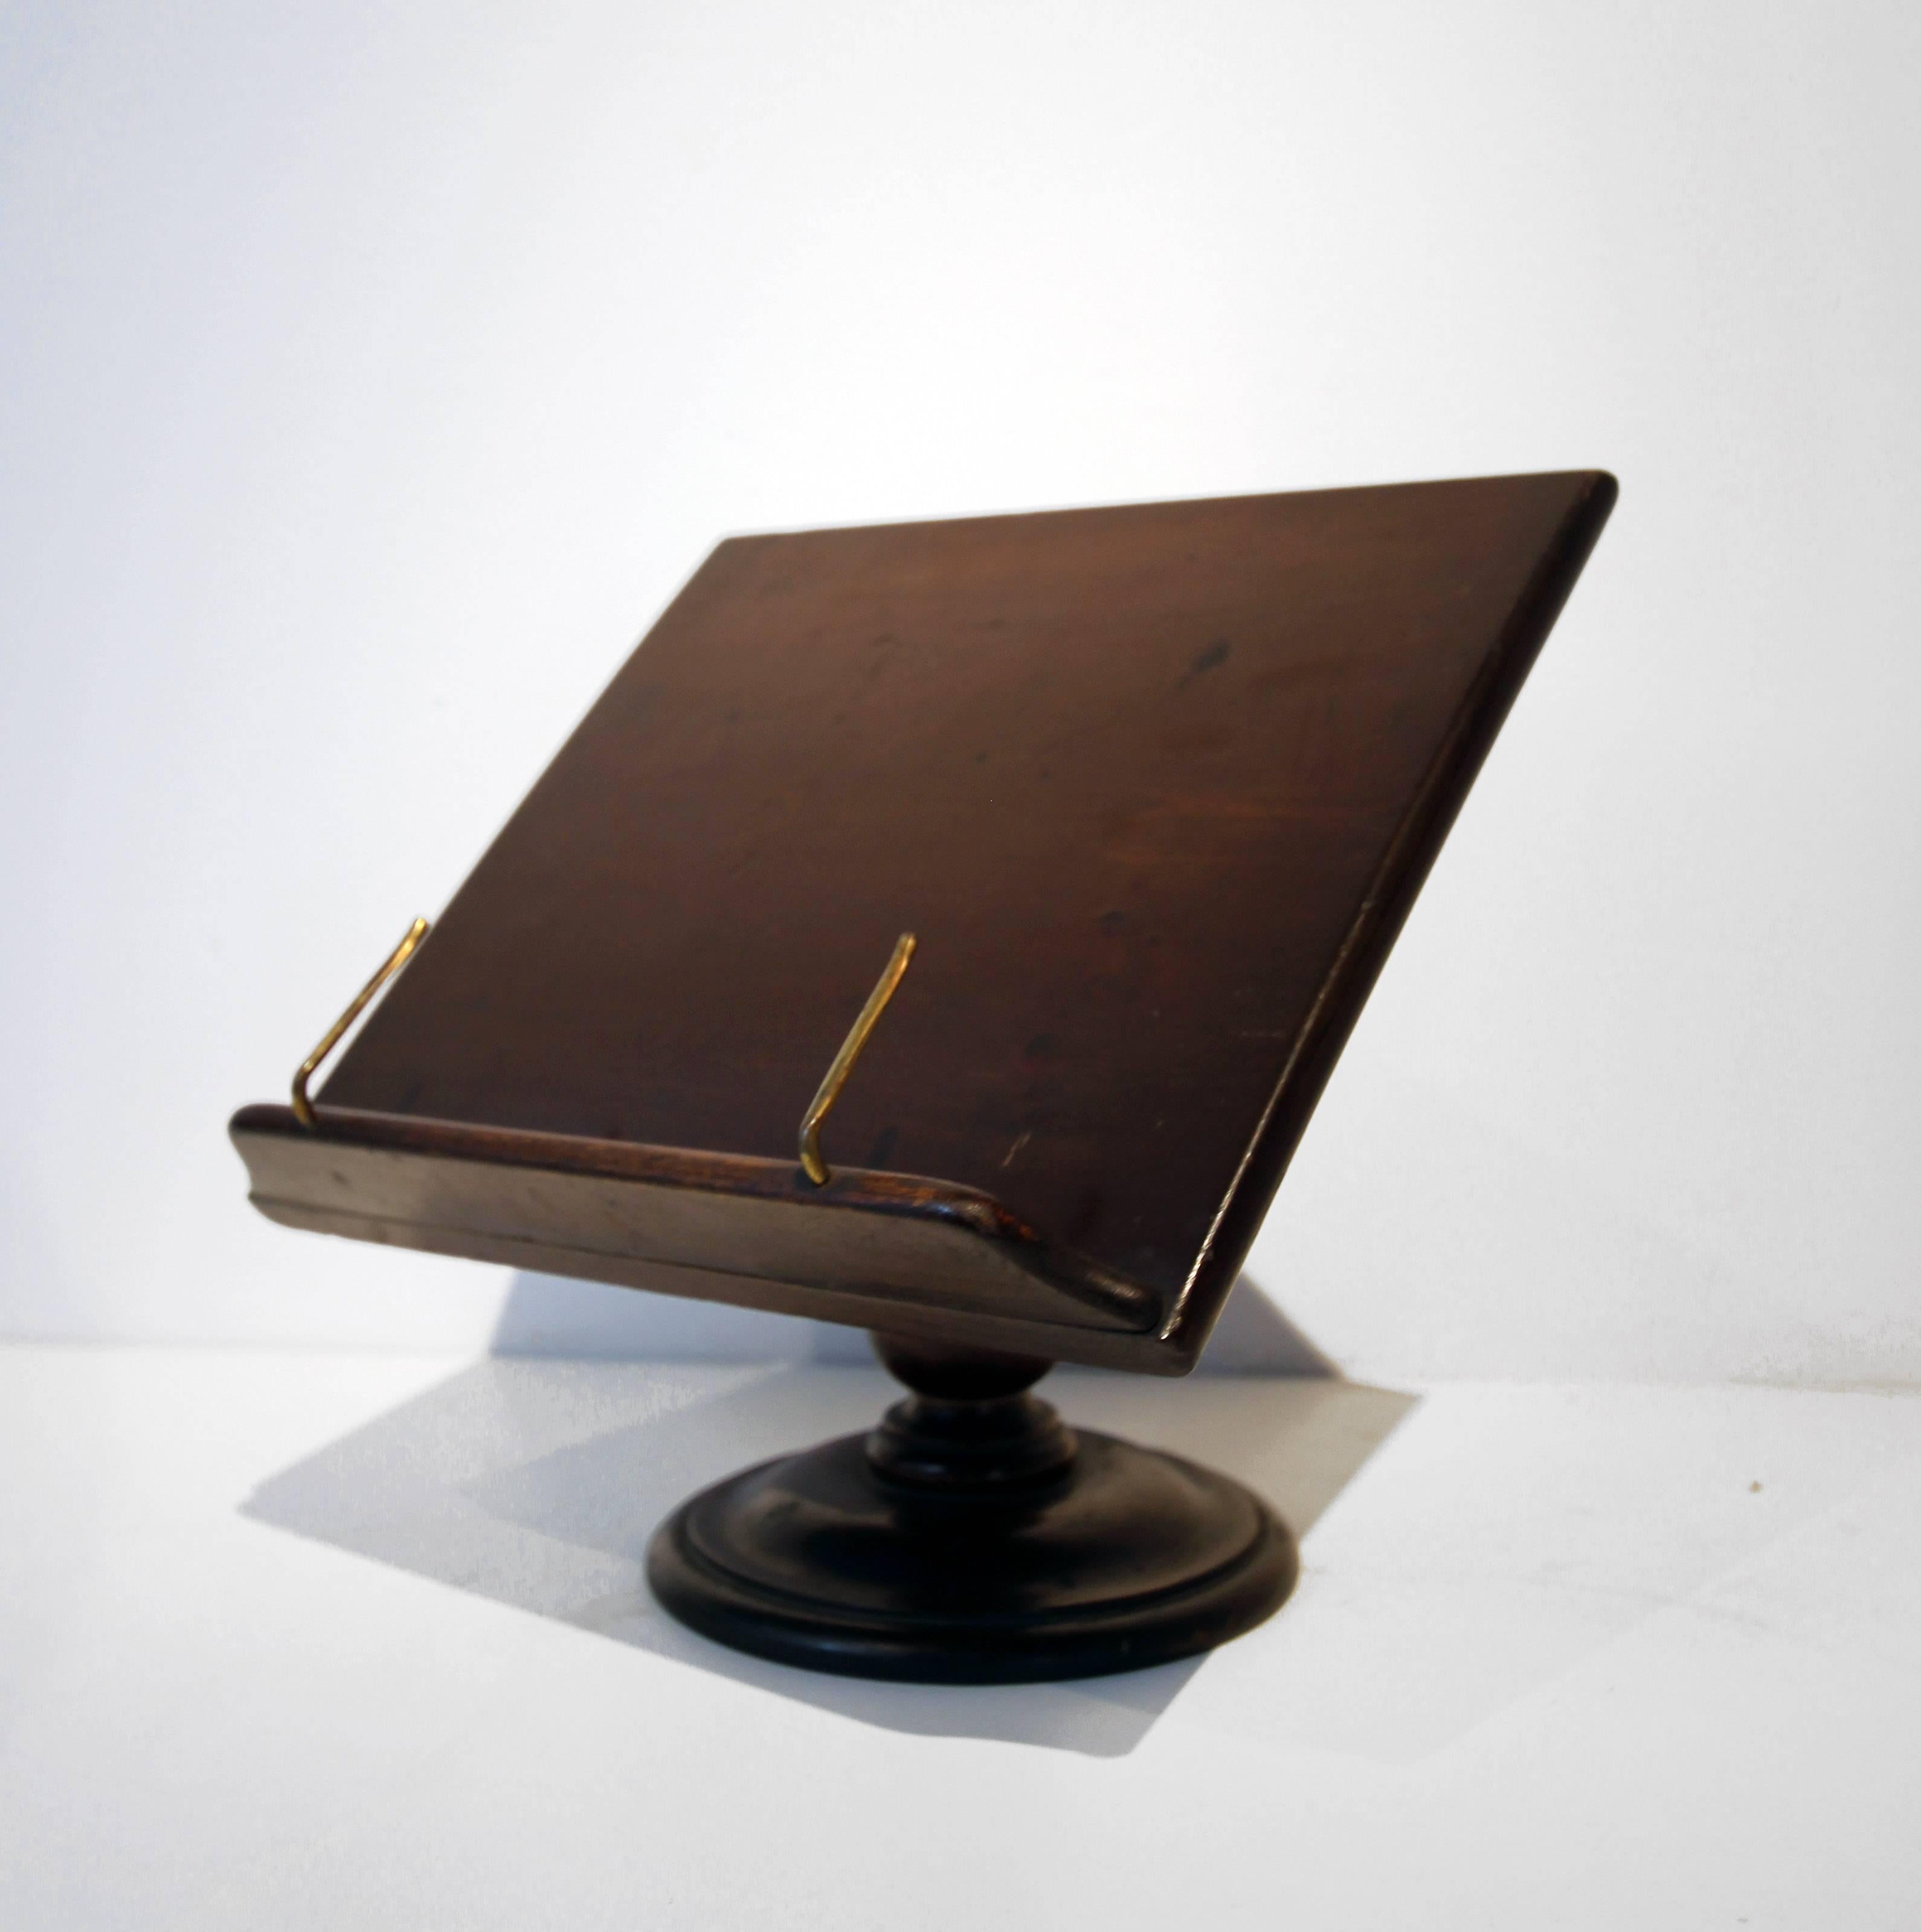 Table or desk top book lectern for holding and displaying books - great for cookbooks (or iPad) in the kitchen. Handsome mahogany wood, two parts, turned base. Original brass book holder parts. Very well made. English, late 19th century.